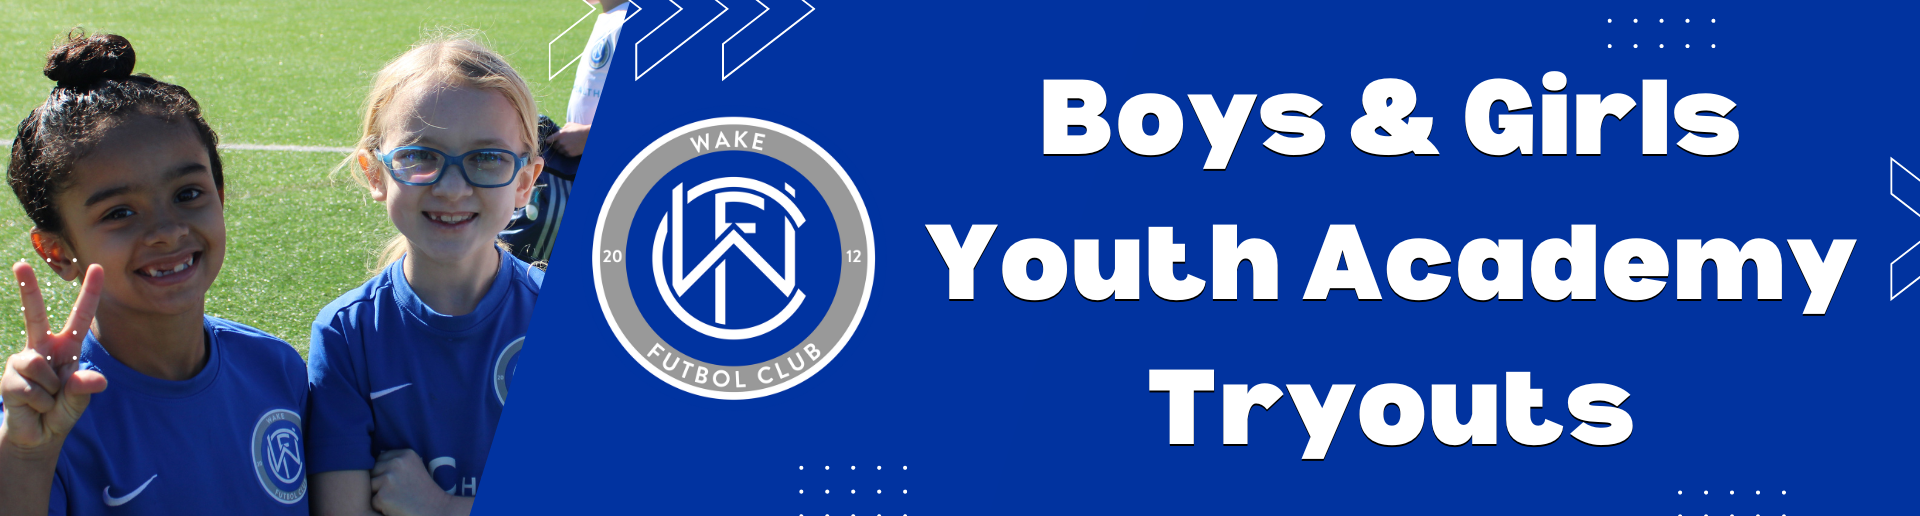 Boys & Girls Youth Academy Tryouts